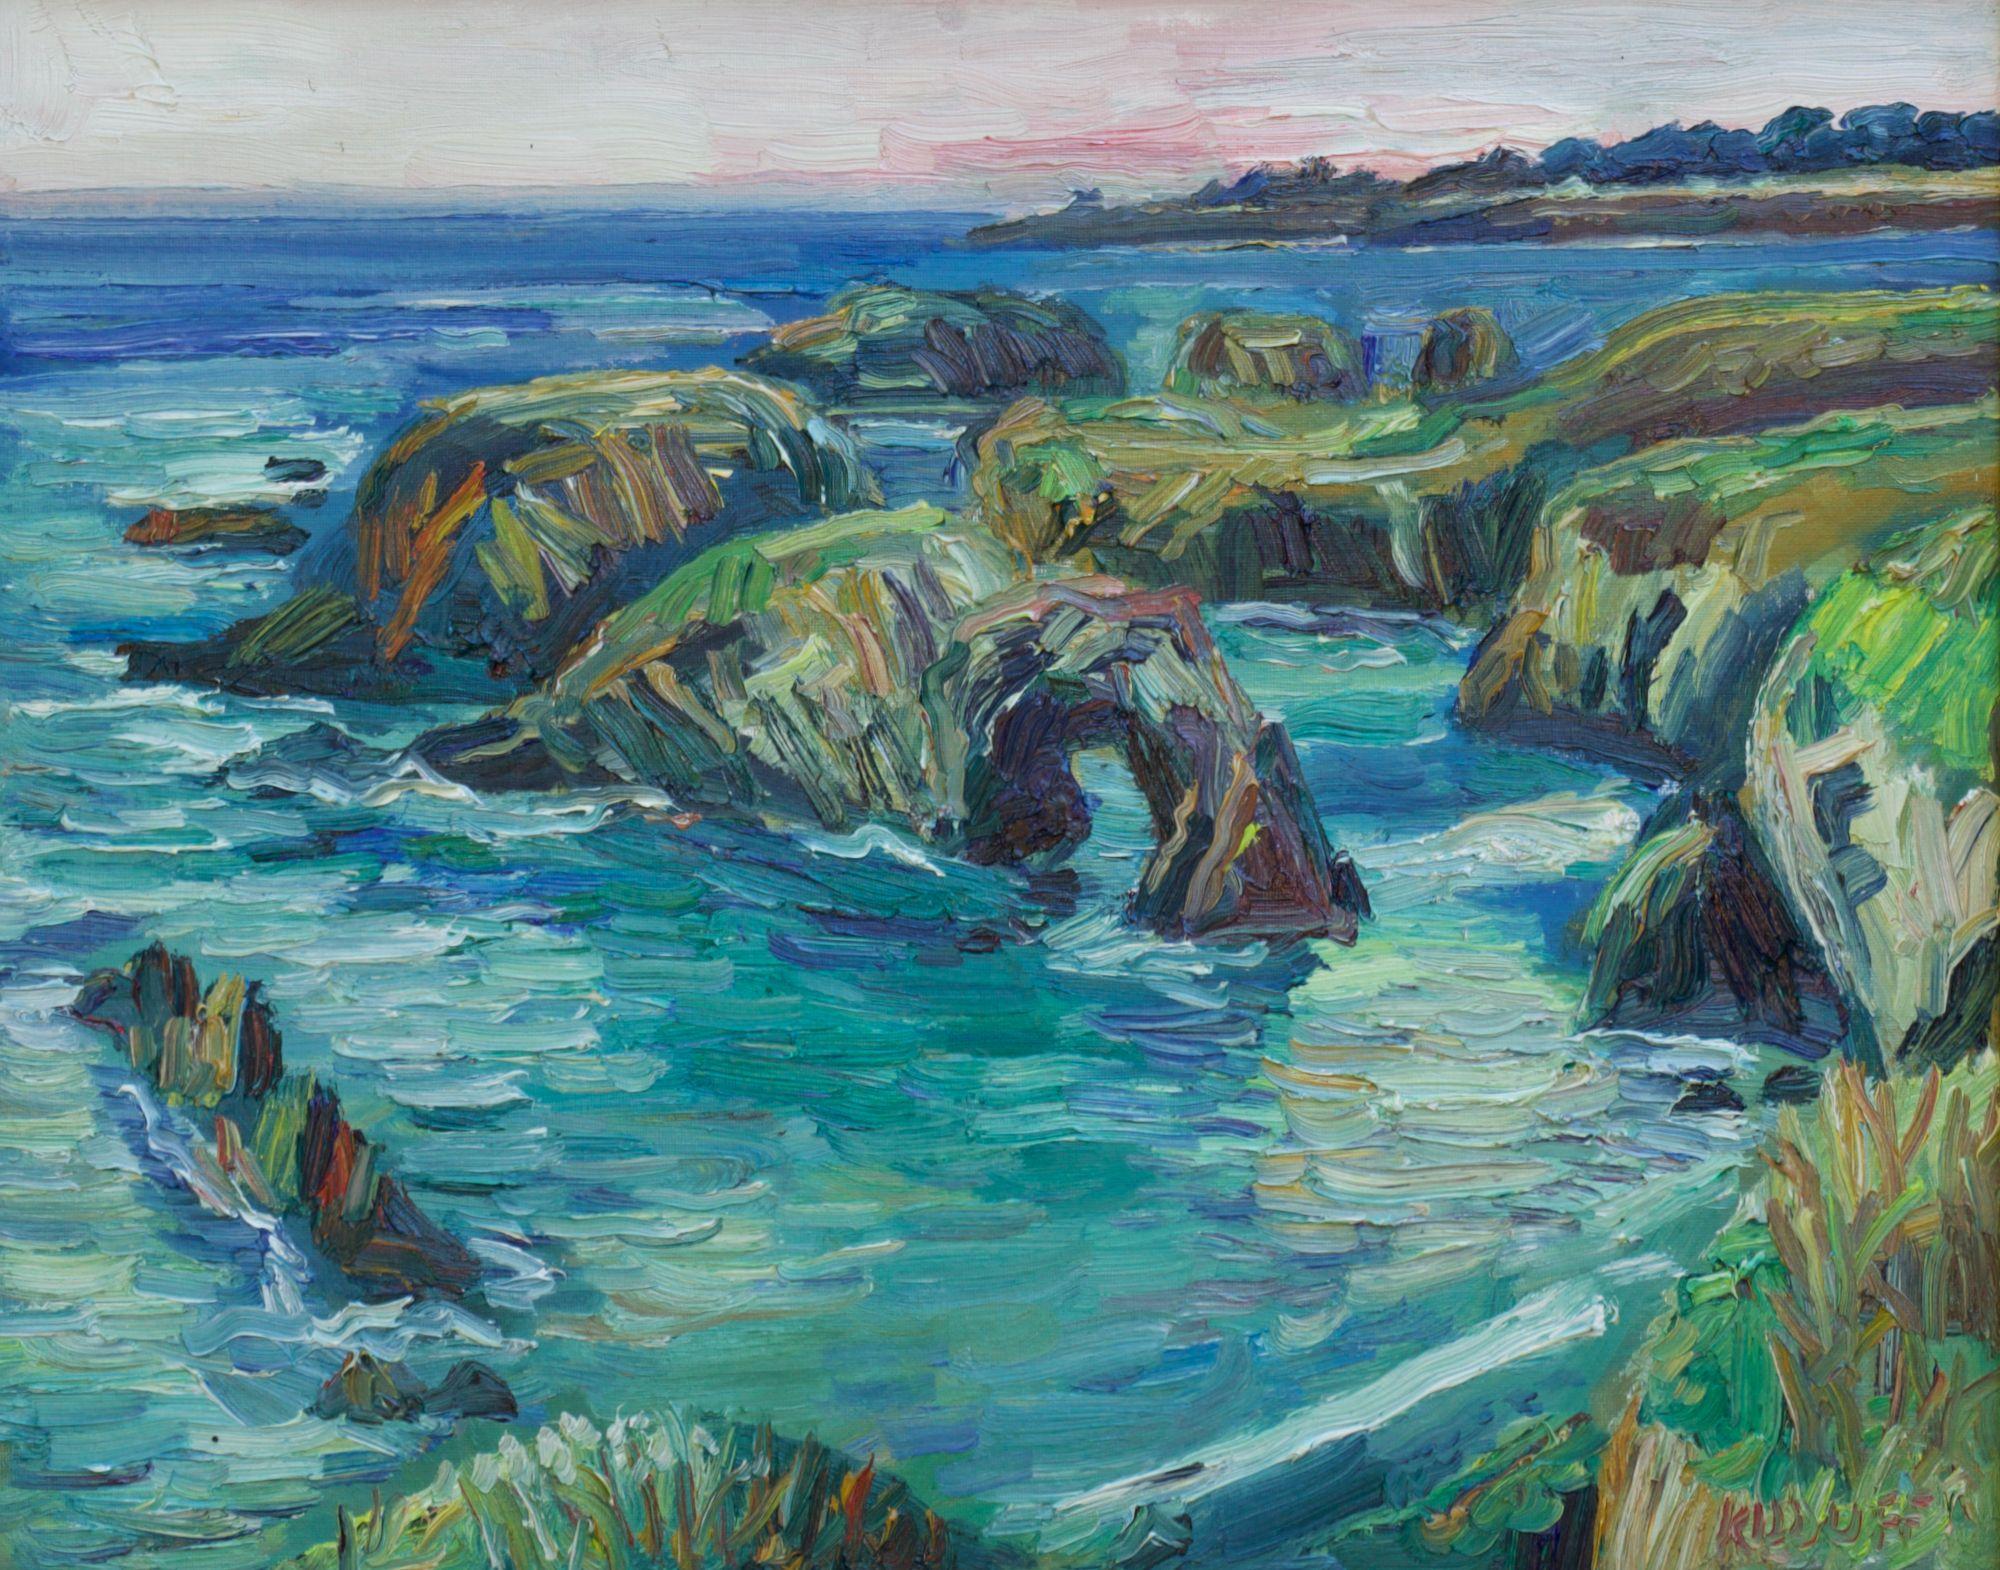 Plein air oil painting of the Mendocino Coast in Mendocino, California. :: Painting :: Impressionist :: This piece comes with an official certificate of authenticity signed by the artist :: Ready to Hang: Yes :: Signed: Yes :: Signature Location: on